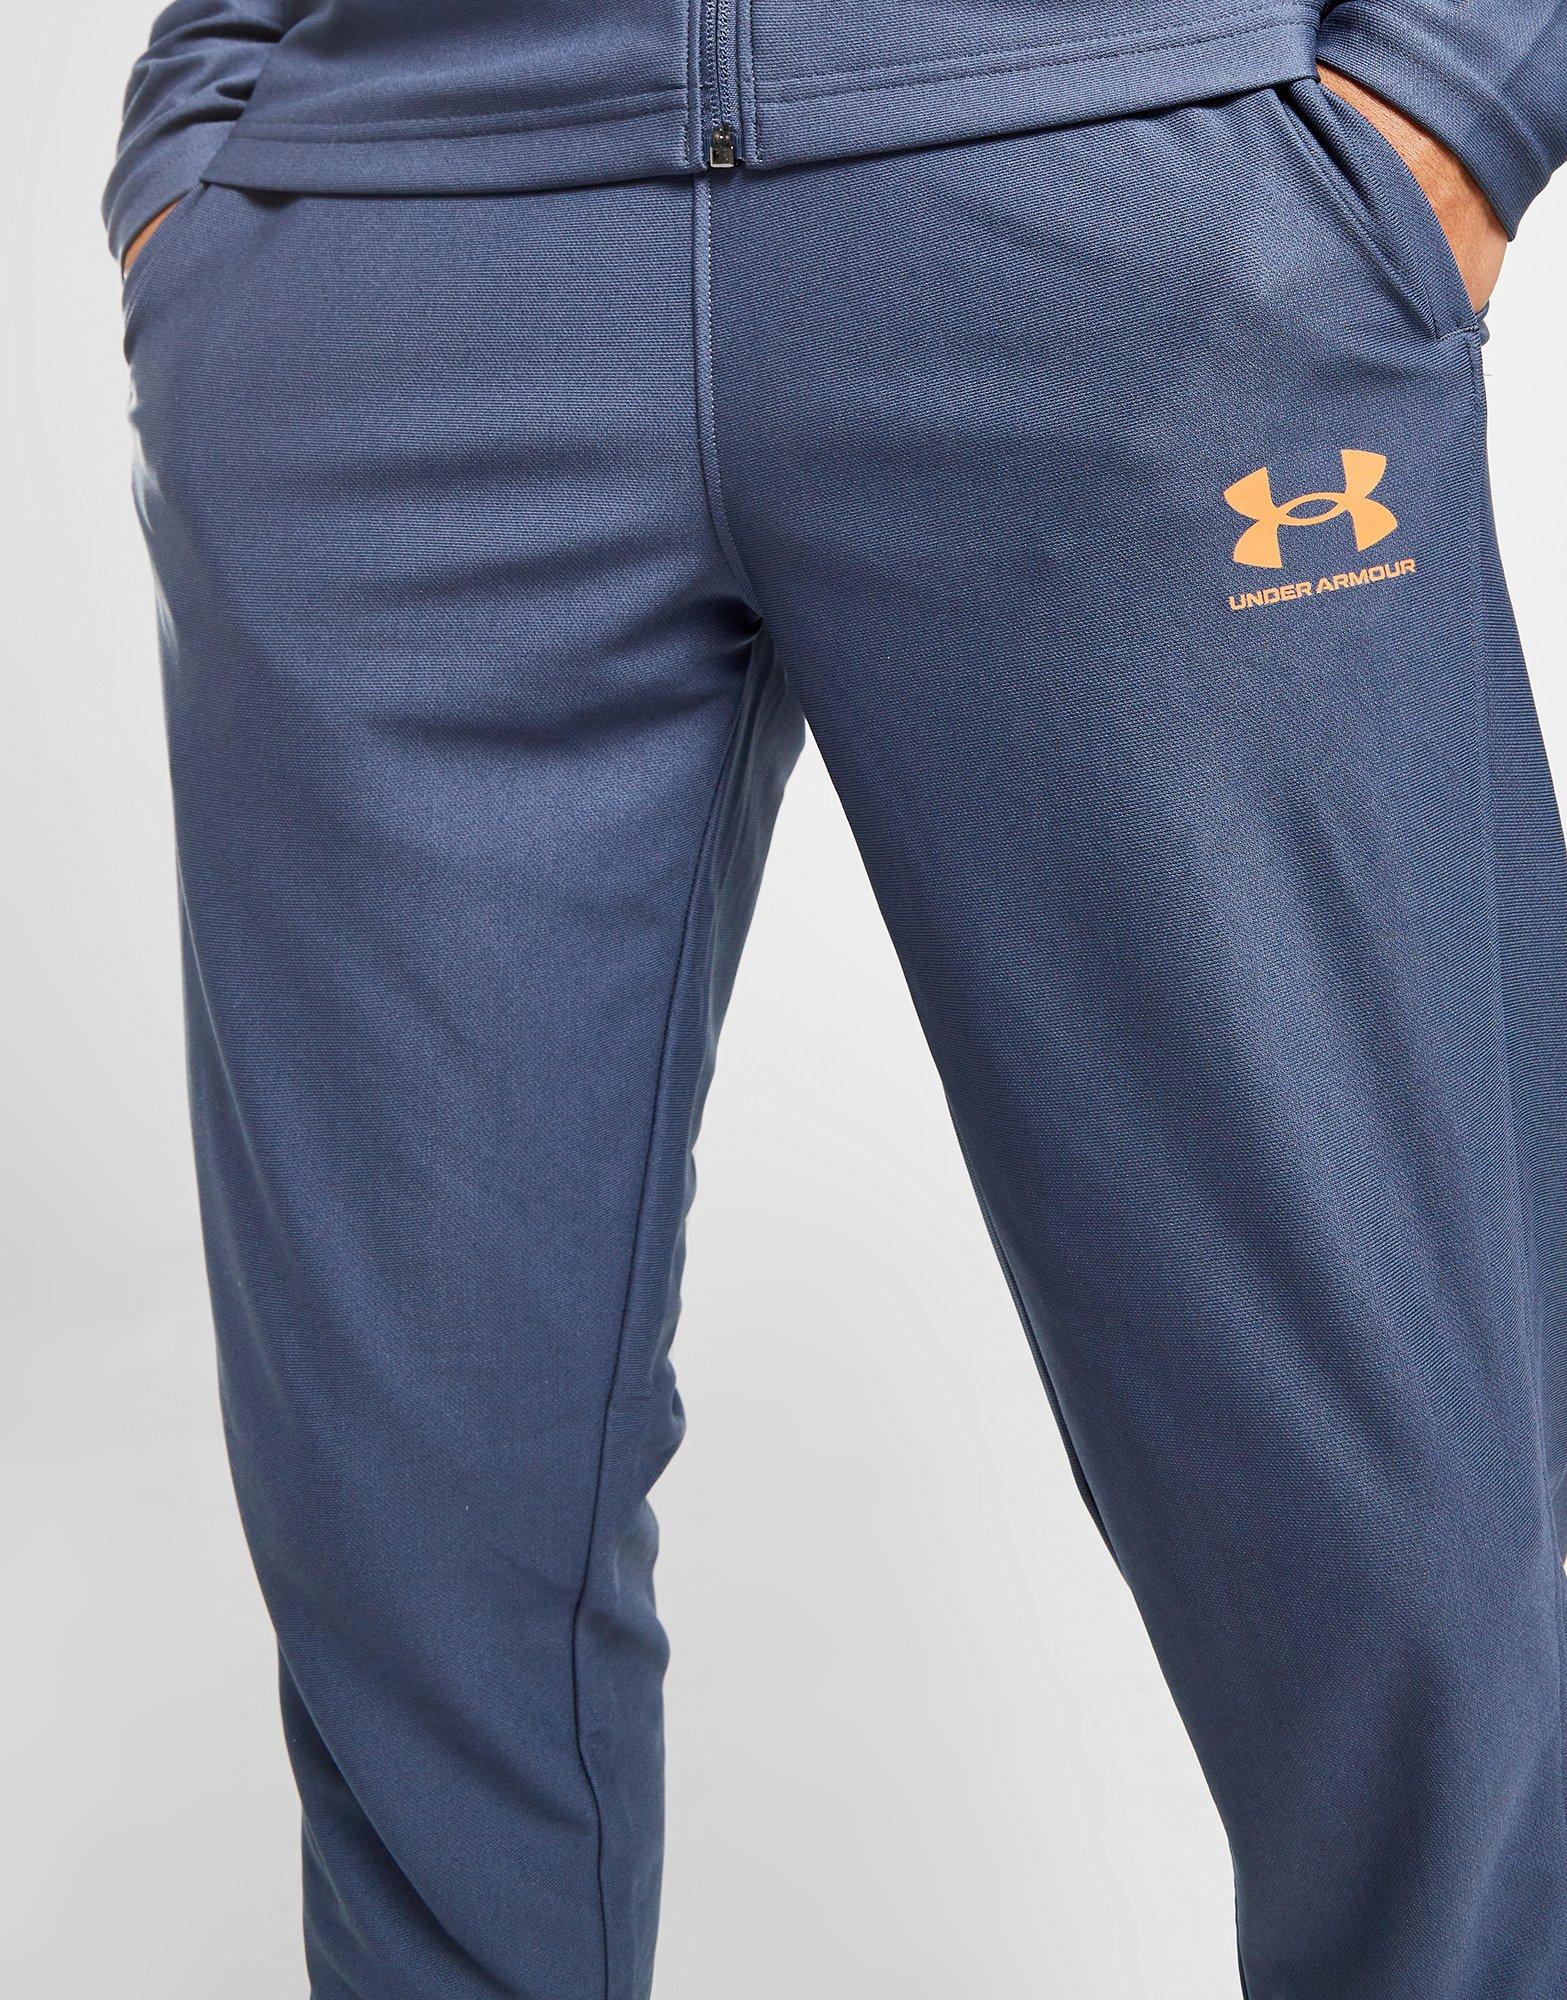 Under Armour Men's Challenger Pants Navy/Blue – Alive & Dirty